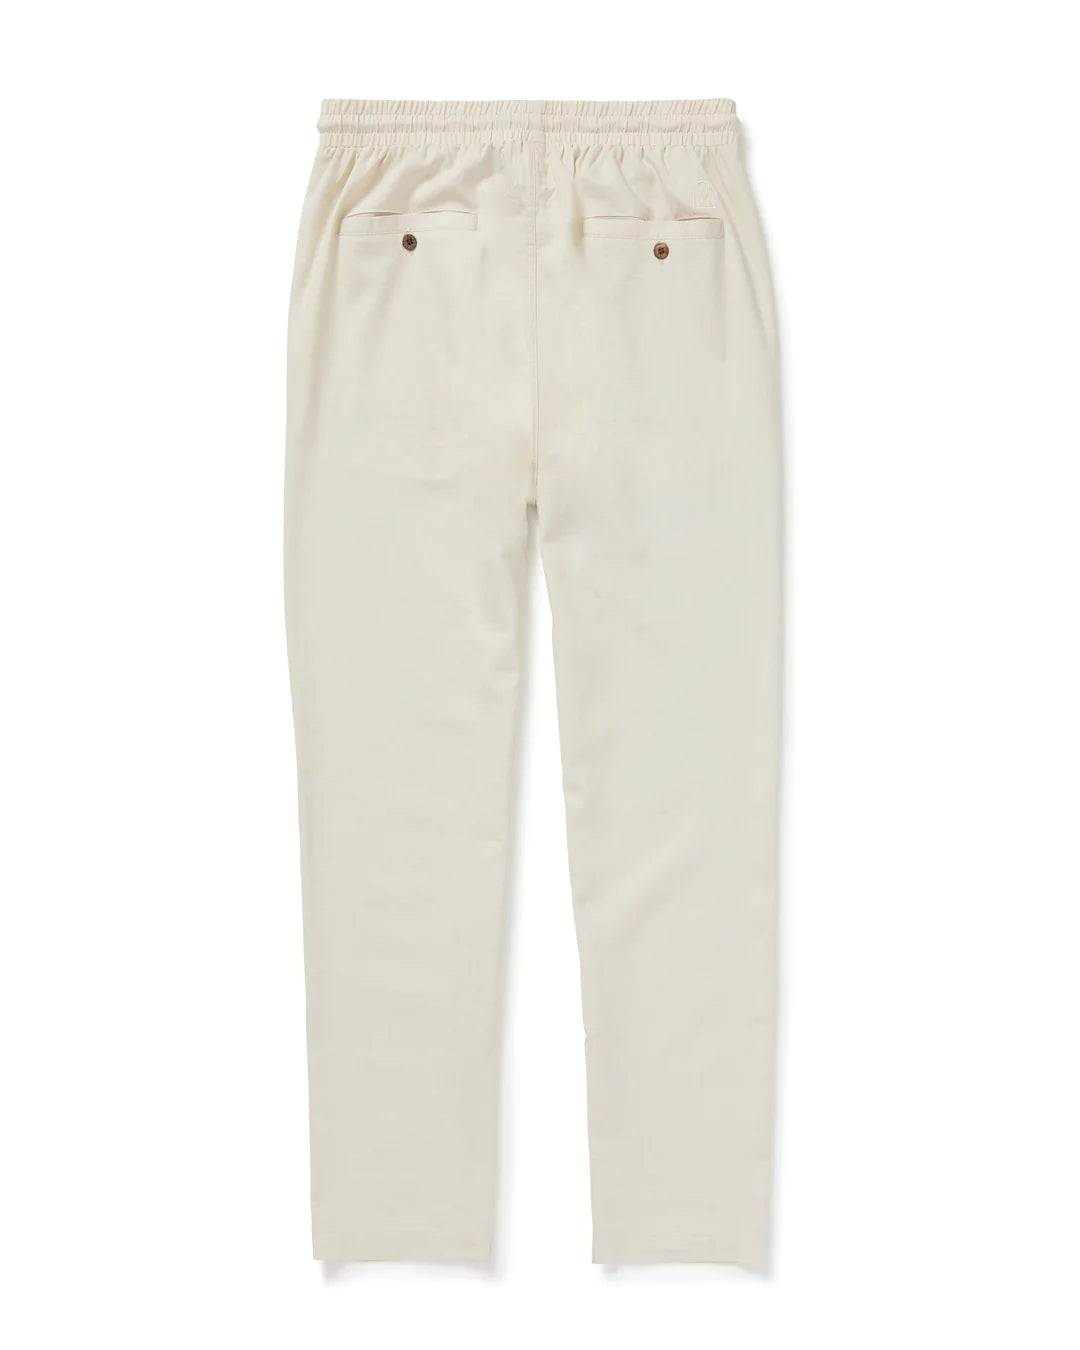 Dandy Del Mar - DANDY DEL MAR THE BRISA LINEN PANT IN VINTAGE IVORY - Rent With Thred